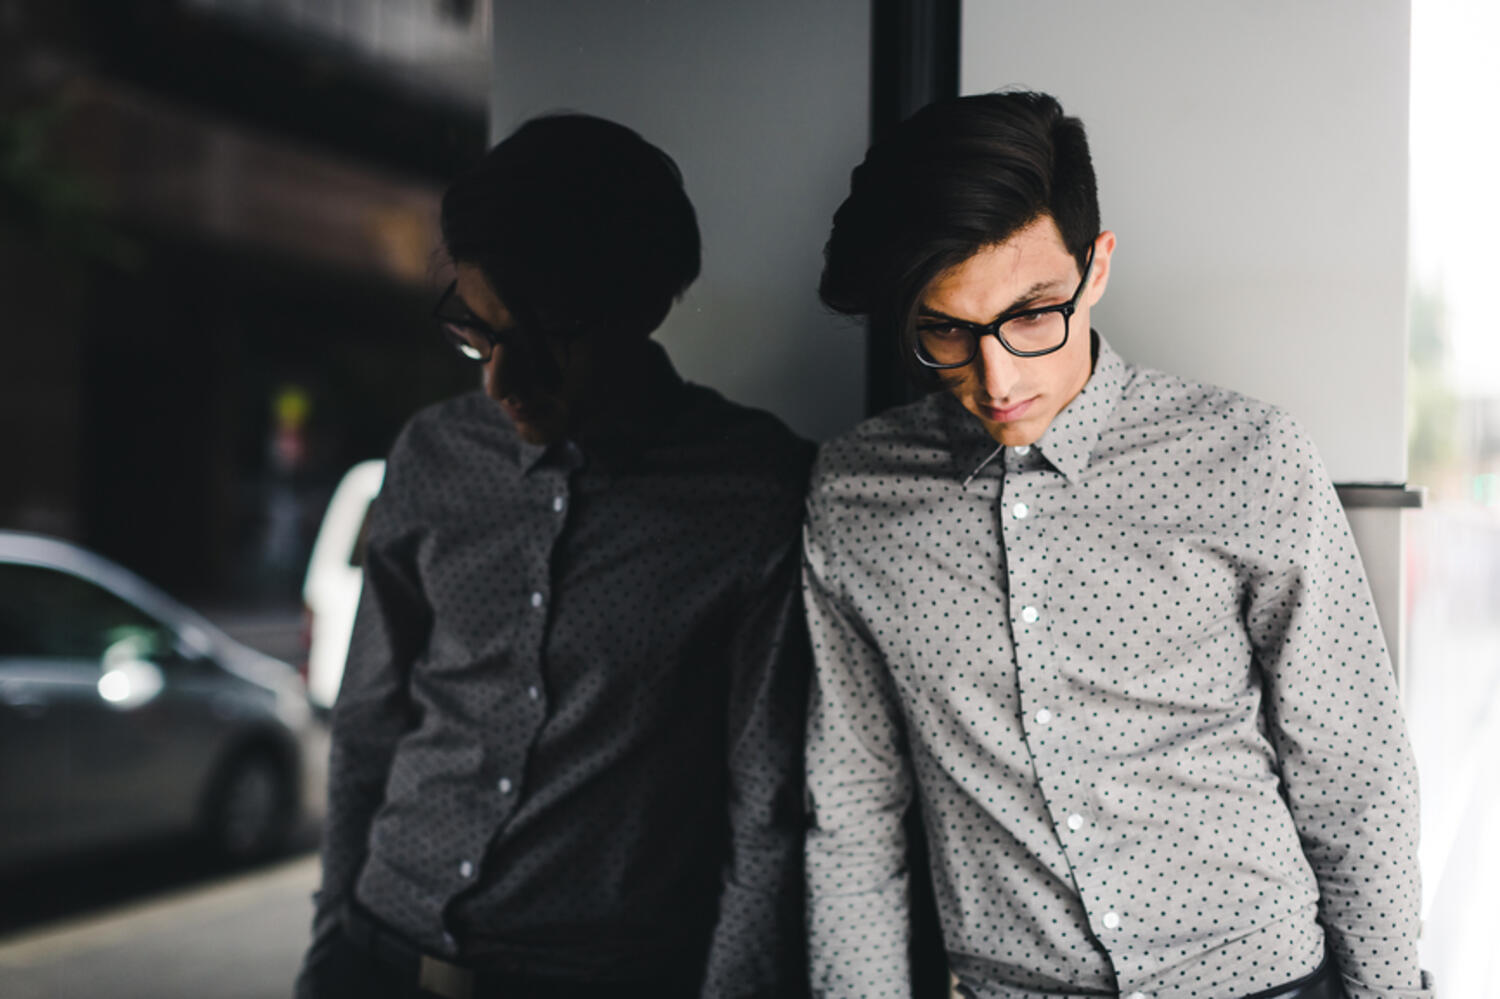  The Raw Millennial Truth: Being a Manager Disappoints